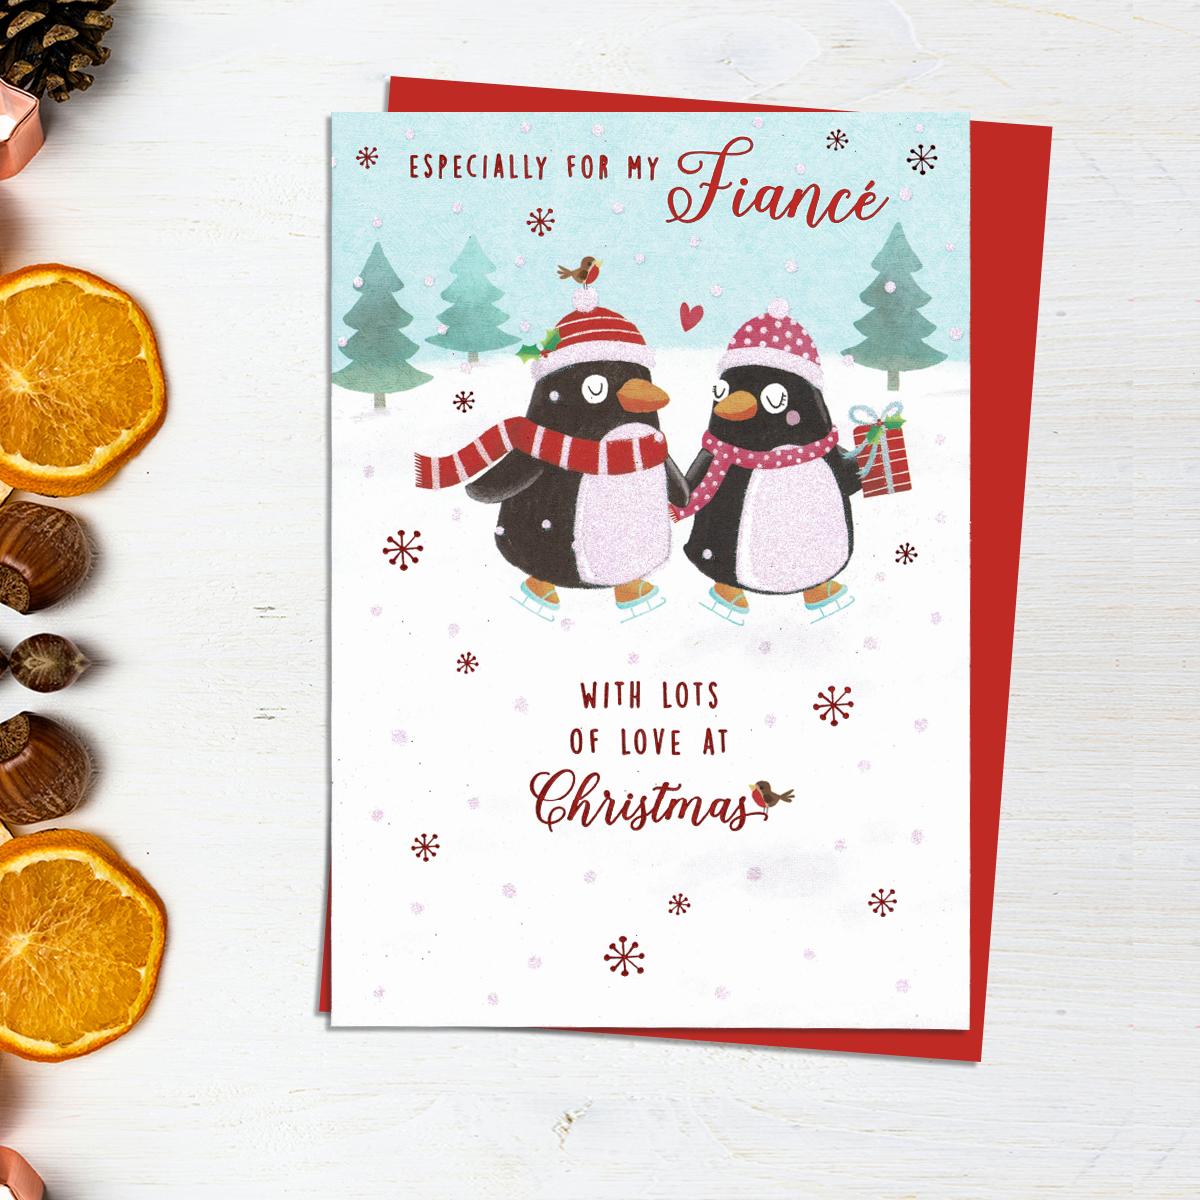 Especially For My Fiancé With Lots Of Love At Christmas Card Showing Two Penguins Ice Skating. With Added Sparkle And Red Envelope